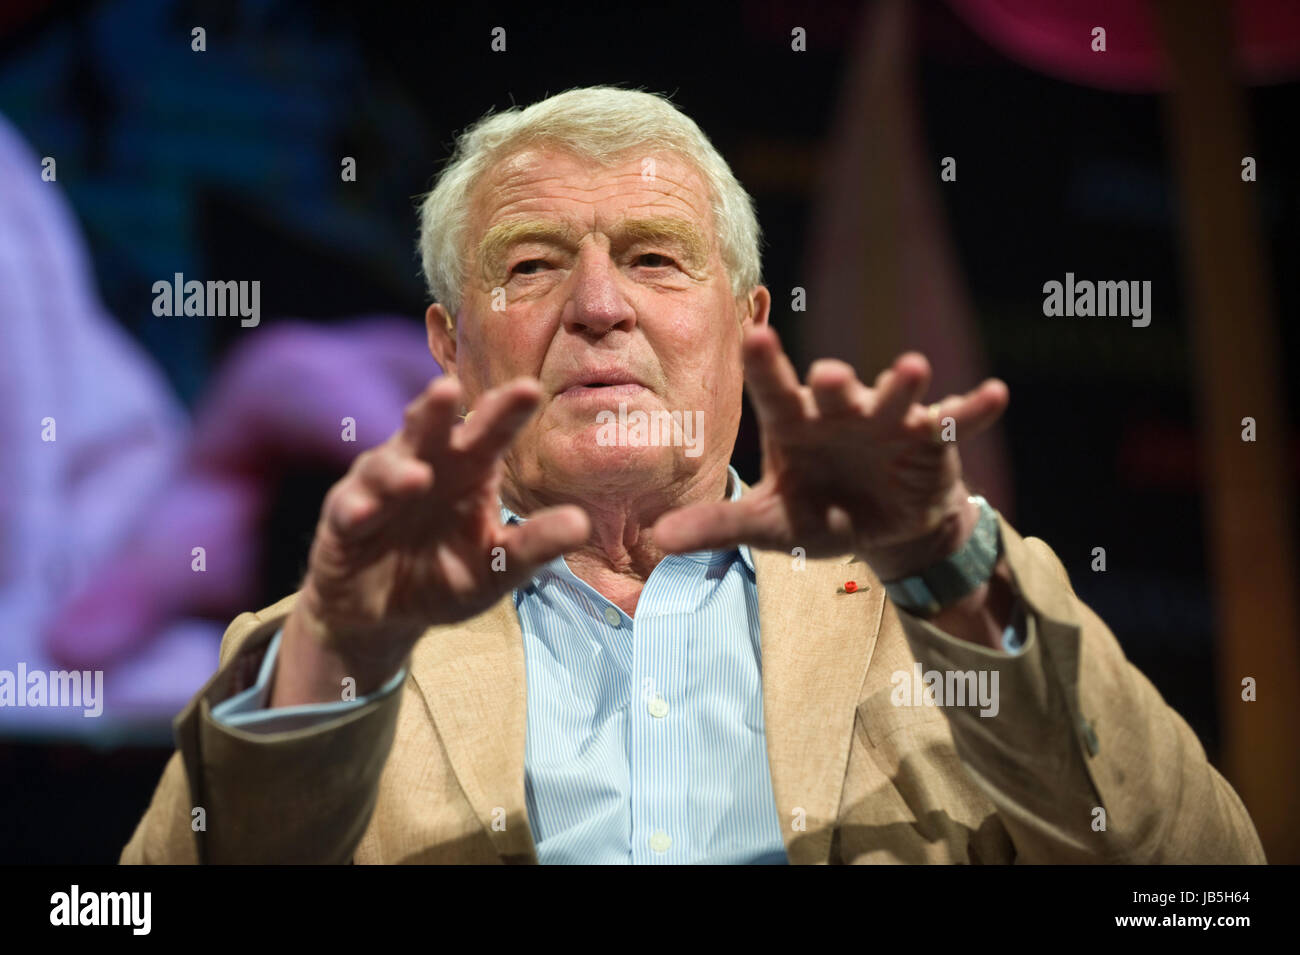 Paddy Ashdown British politician diplomat and author speaking on stage at Hay Festival of Literature and the Arts 2017, Hay-on-Wye, Powys, Wales, UK Stock Photo